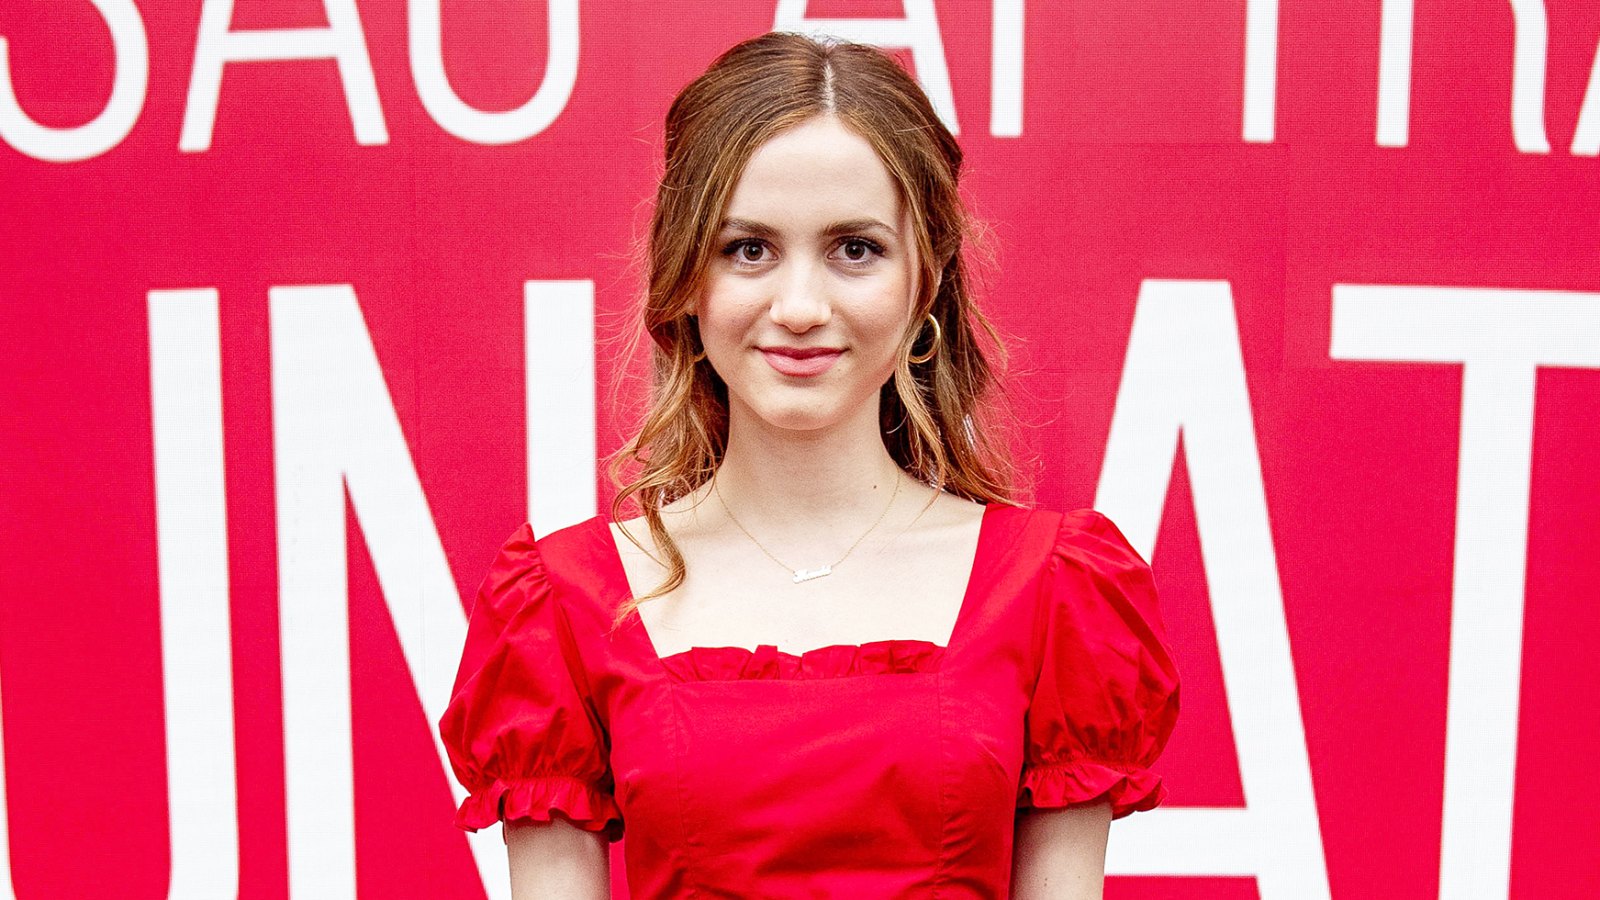 Maude Apatow: What's in My Bag?